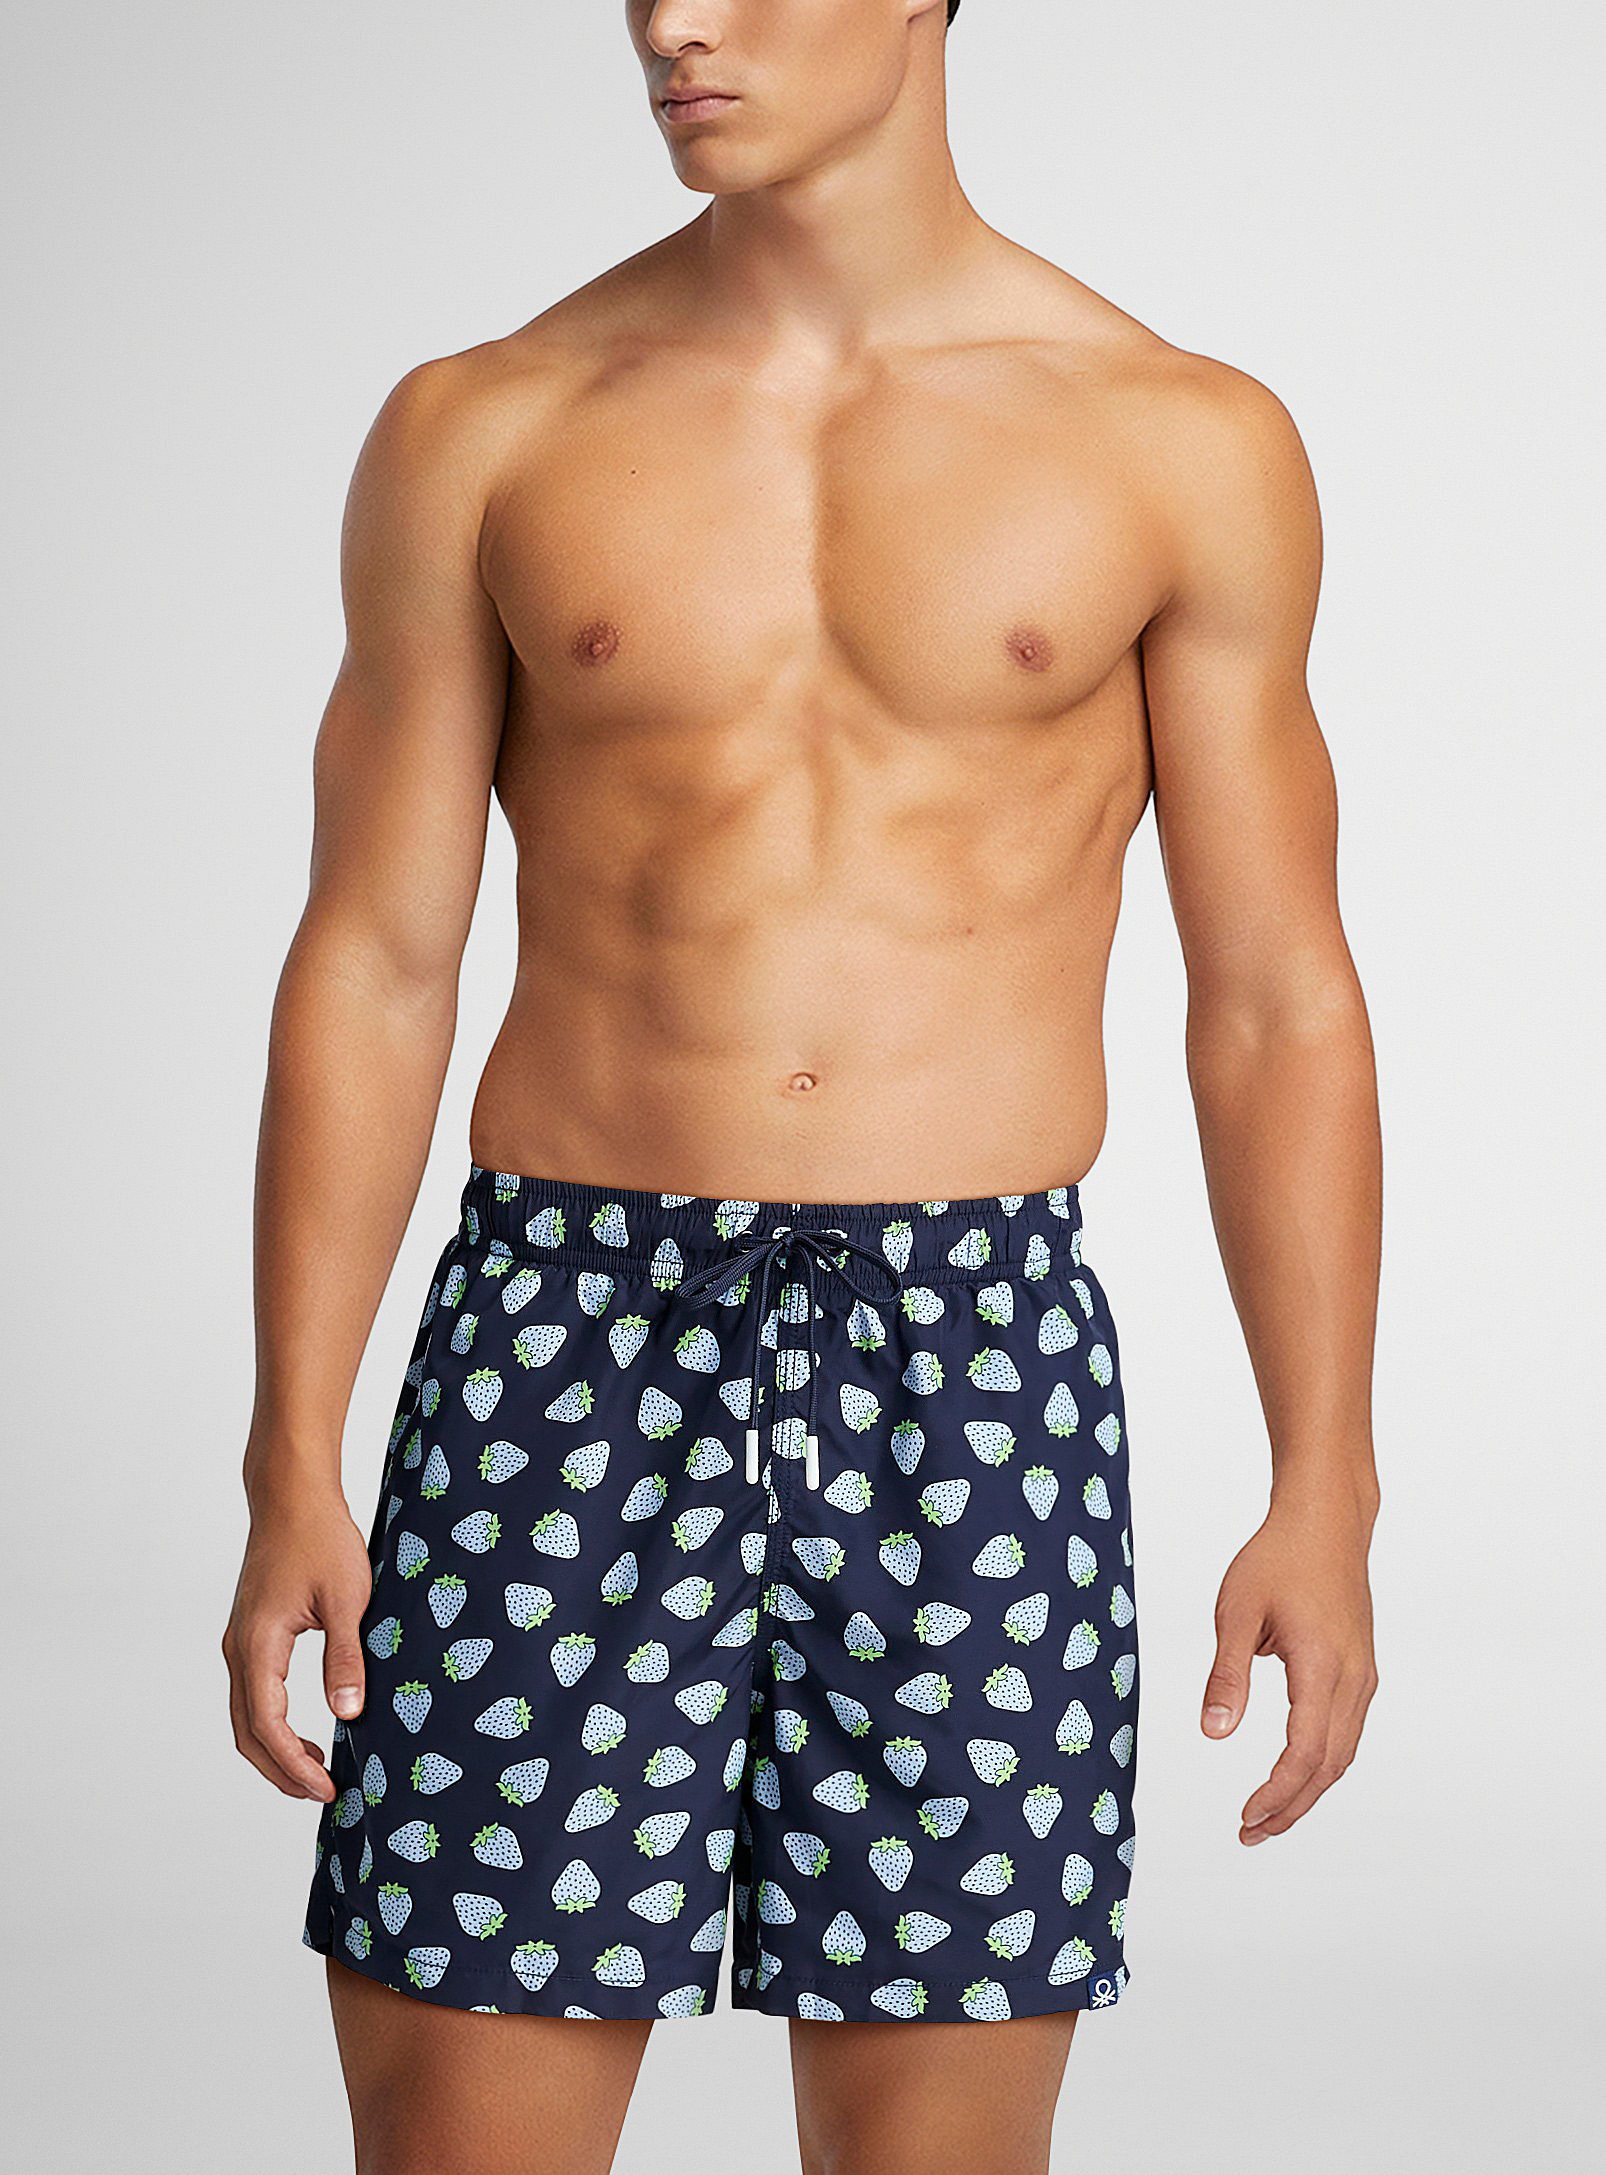 United Colors of Benetton - Men's Muted strawberry swim trunk